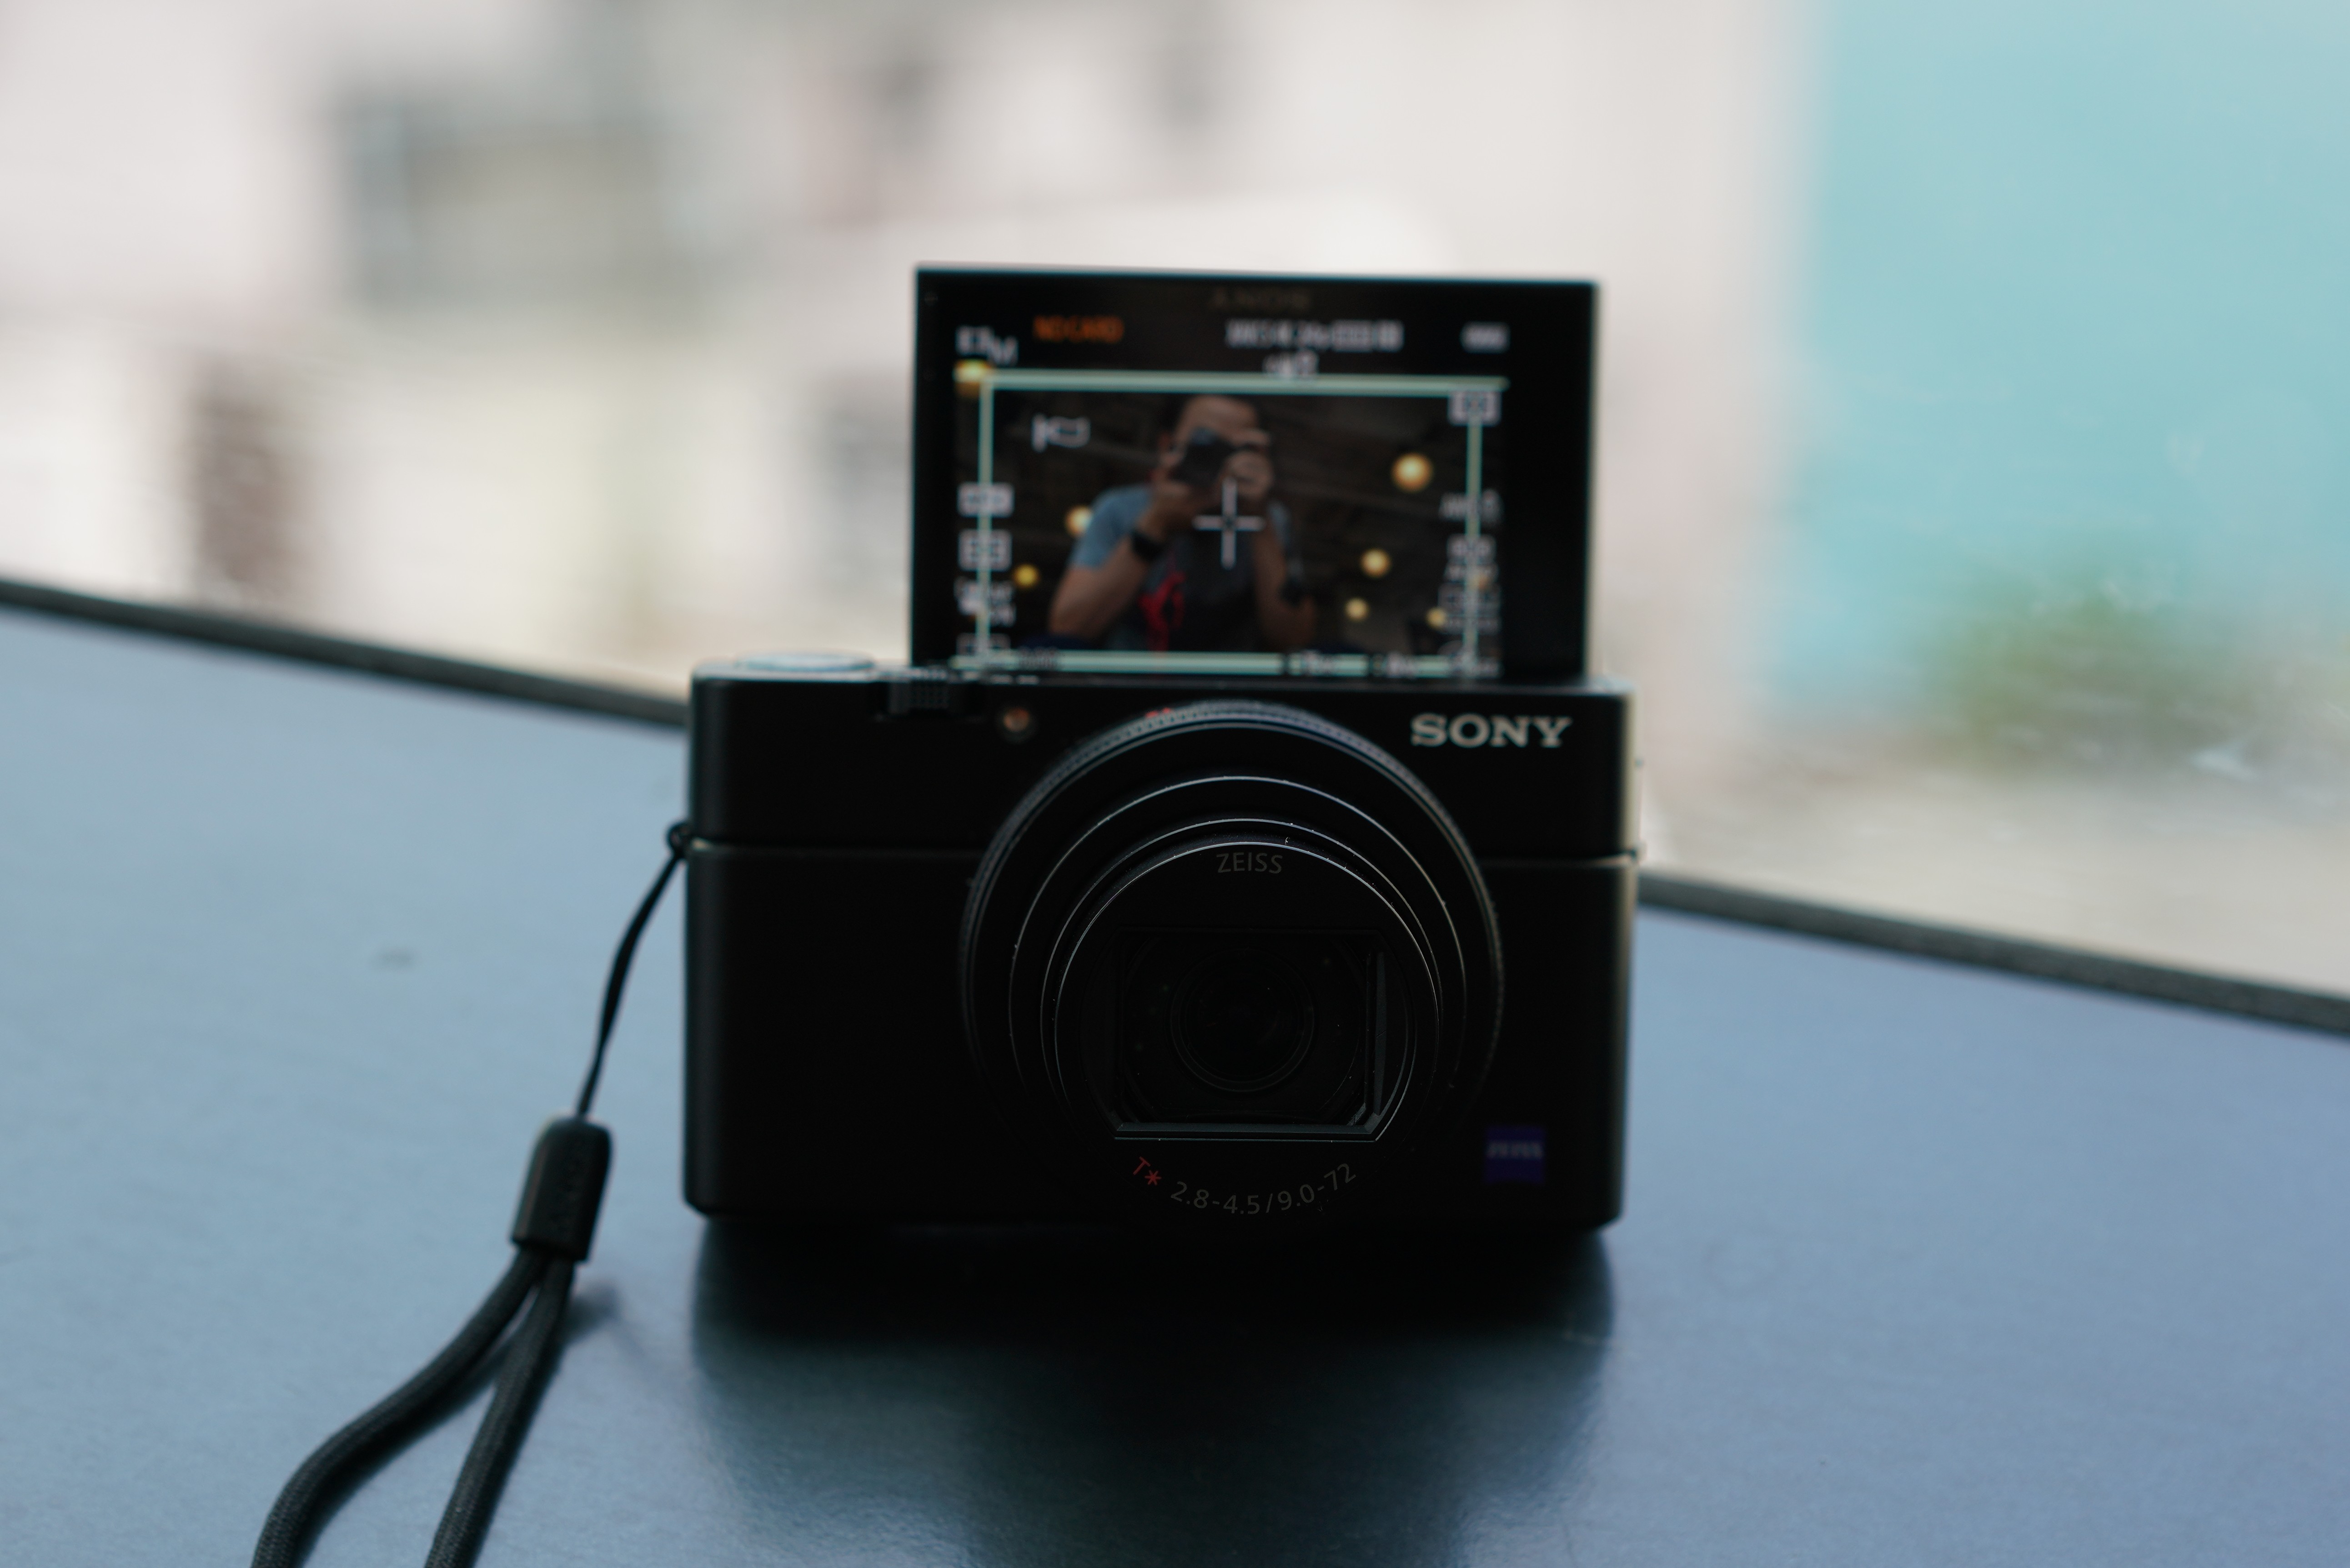 The Sony RX 100 Mark VI compact camera is neat and portable, but you are paying extra for its small size. Photos: Derek Ting